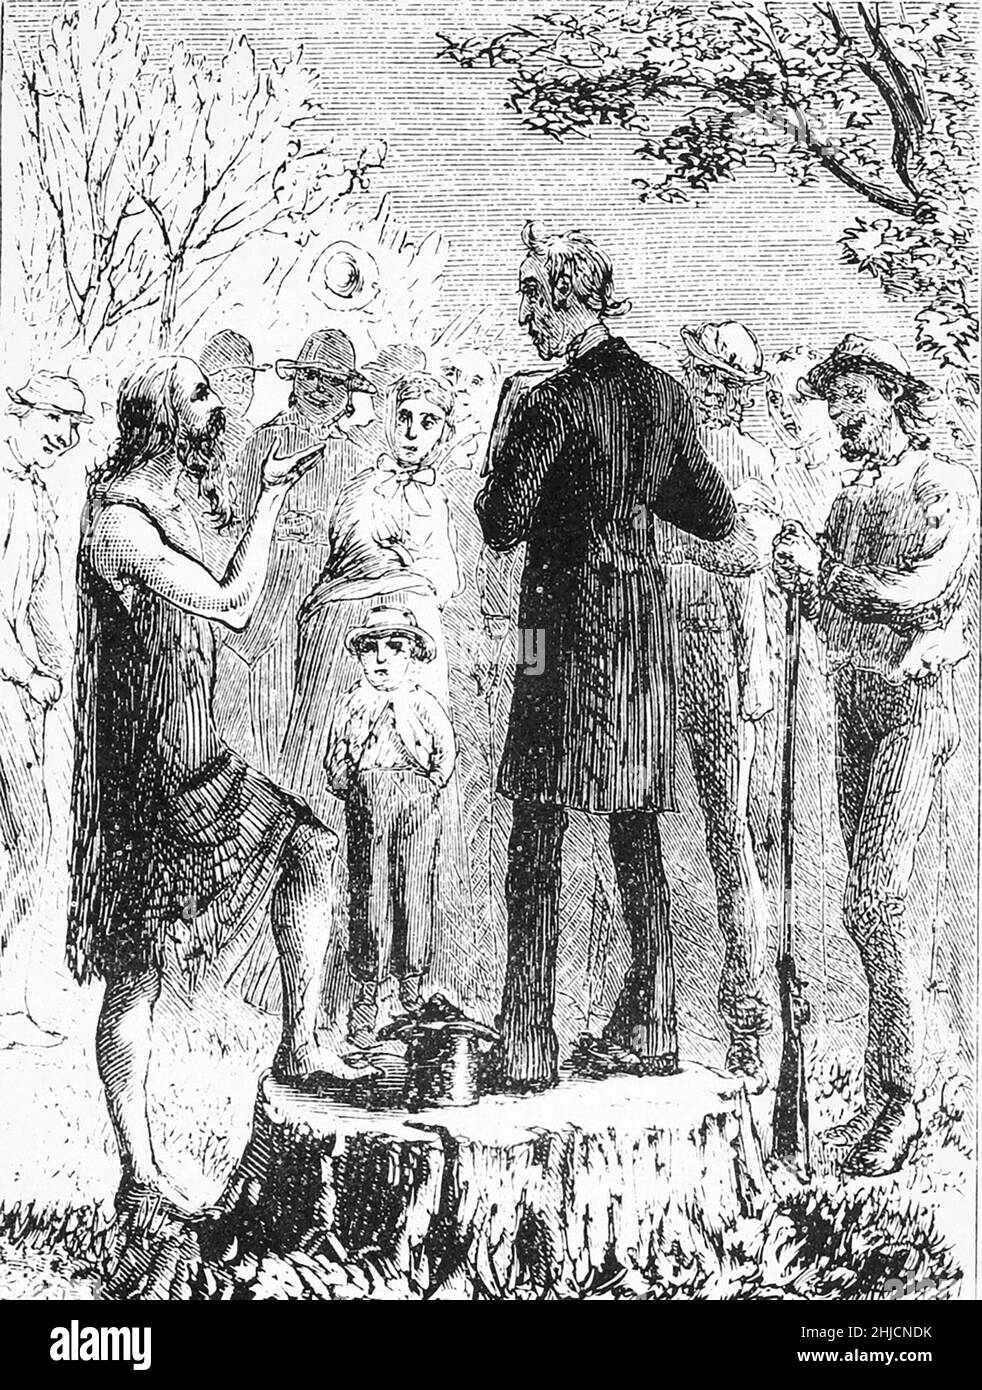 An illustration of Johnny Appleseed delivering a speech, circa 1820.  Published November 1871 in Harper's New Monthly Magazine. John Chapman (1774-1845), better known as Johnny Appleseed, was an American pioneer nurseryman who introduced apple trees to large parts of Pennsylvania, Ohio, Indiana, Illinois and Ontario, as well as the northern counties of present-day West Virginia. He became an American legend with his tree-planting activities. Stock Photo